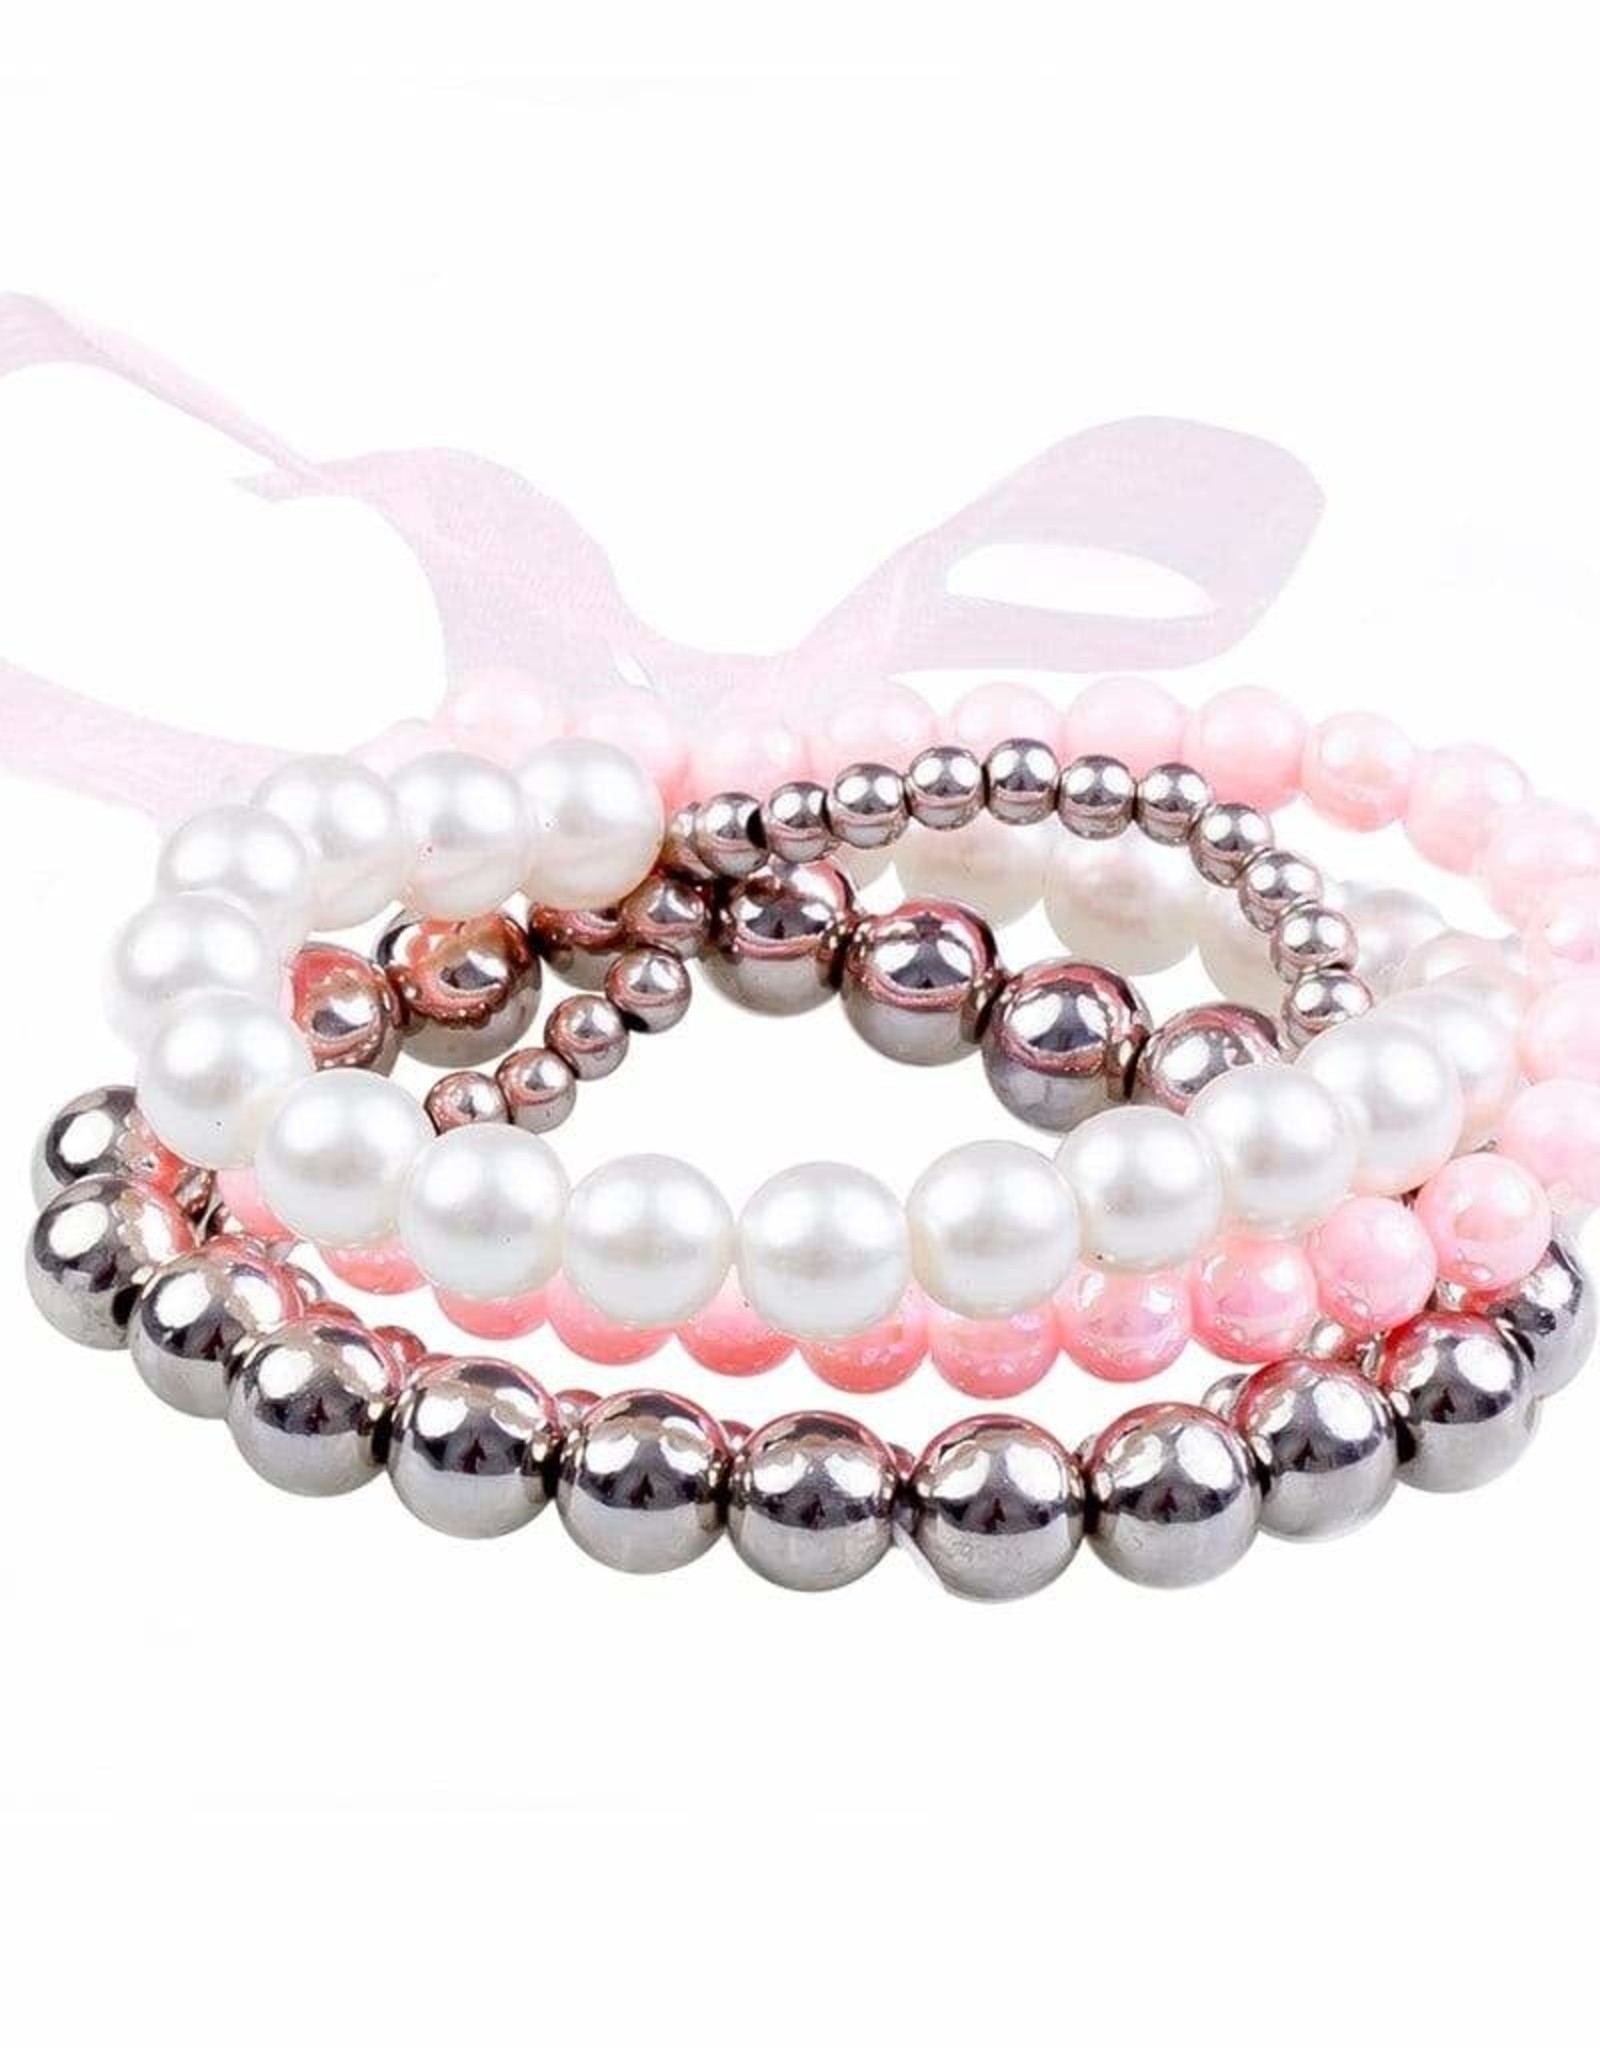 Great Pretenders Pearly to Wed Bracelet Set, 4pcs